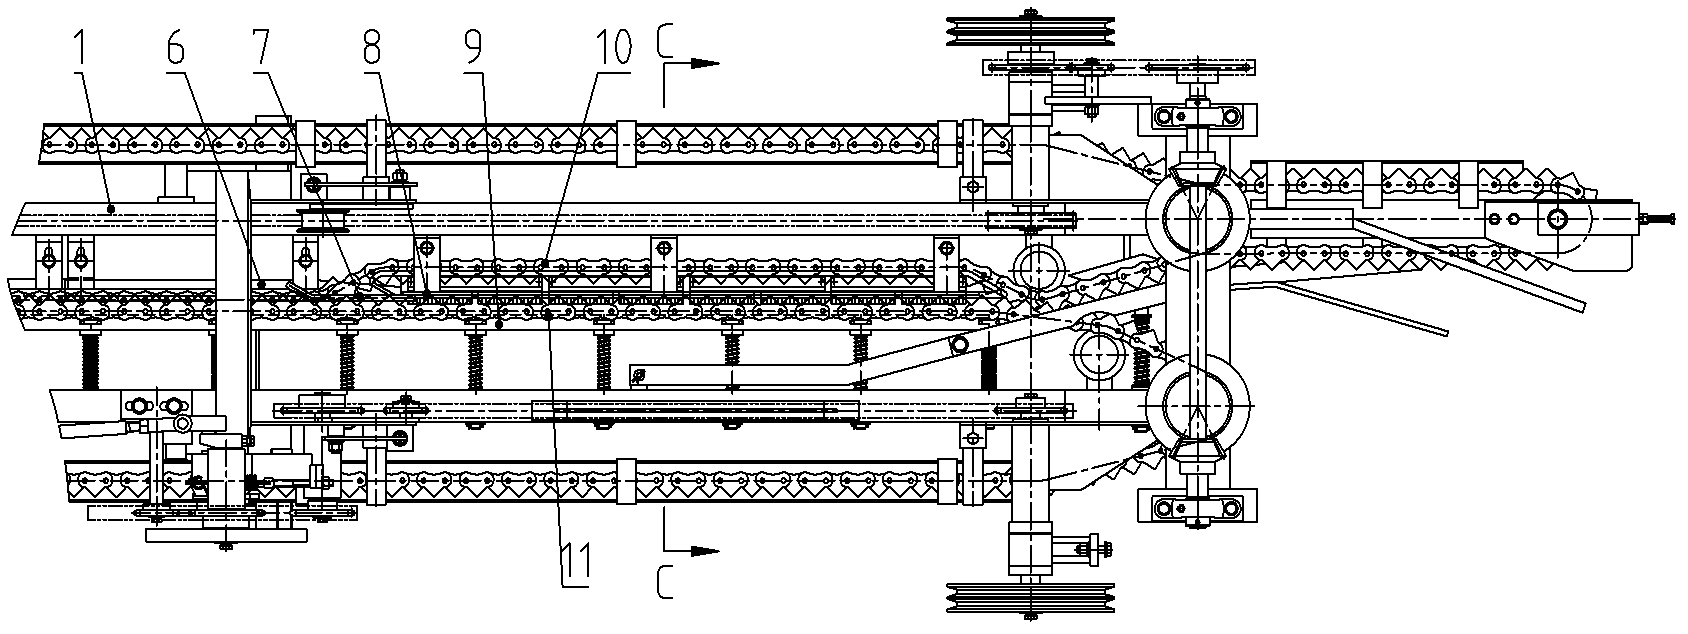 Aligning and separating device for harvesting fruit seedlings of fruits under the ground